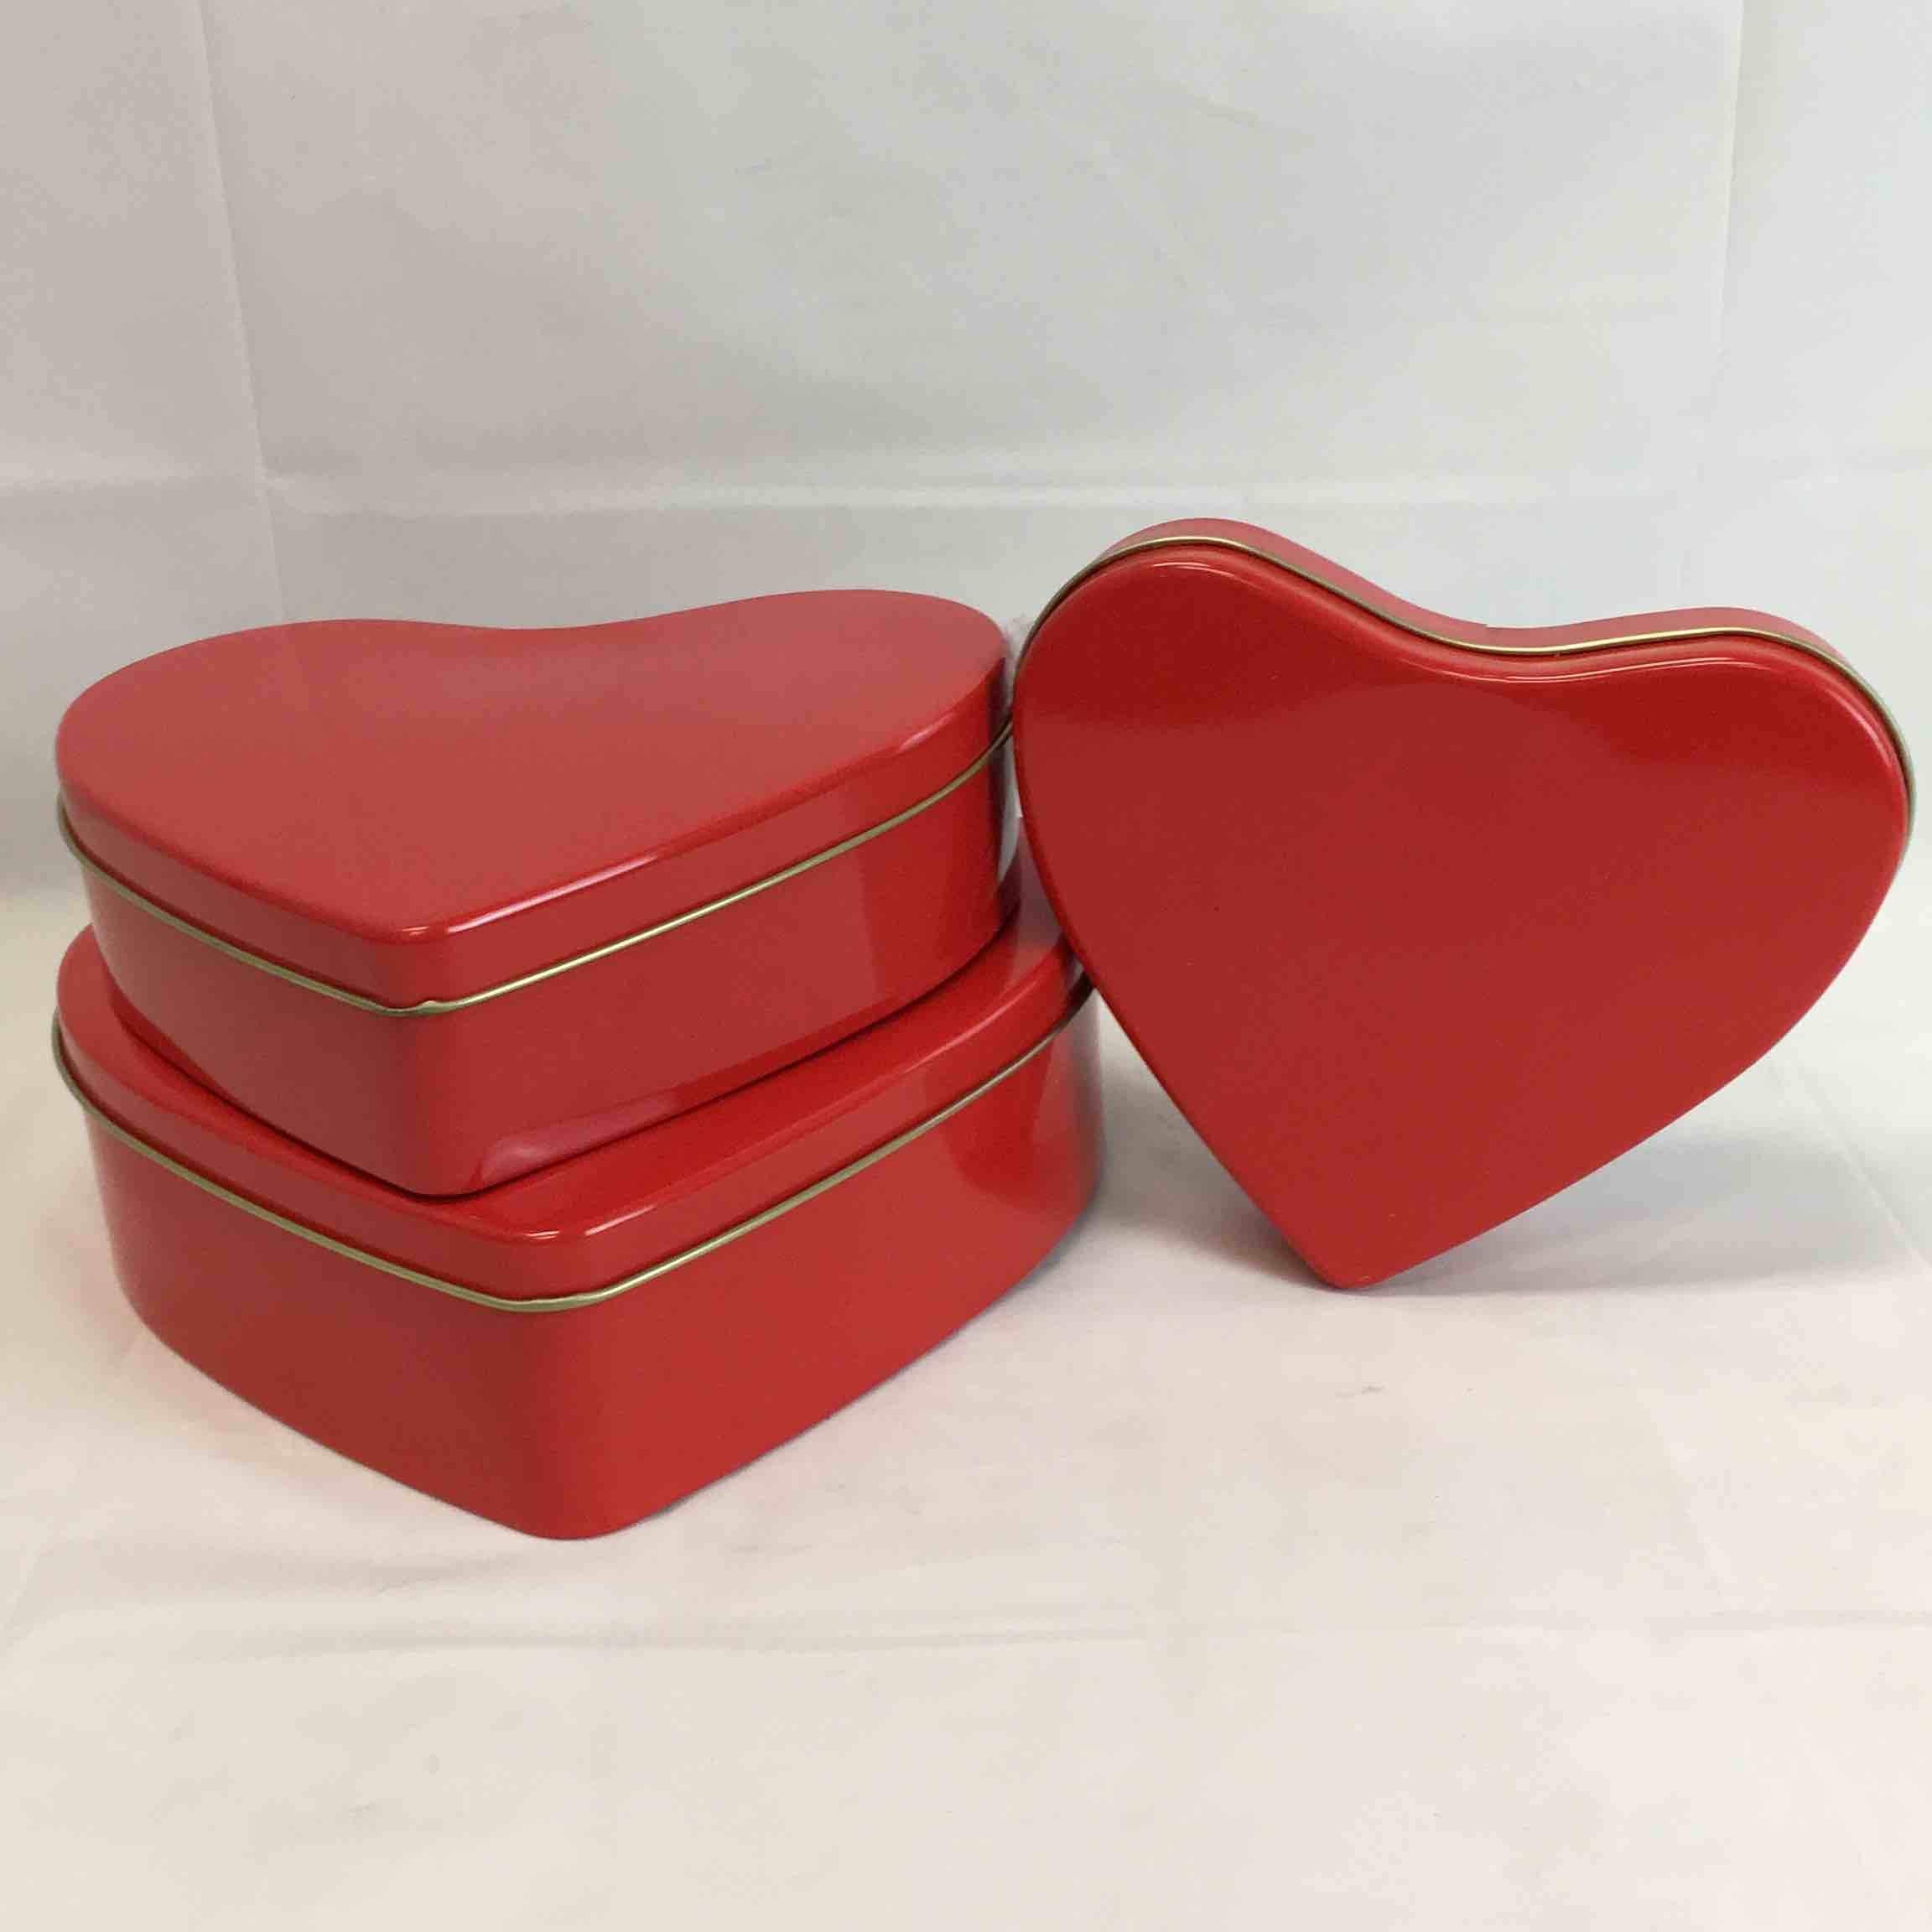 VAL TIN S/3 HEART SHAPED BOXES RED